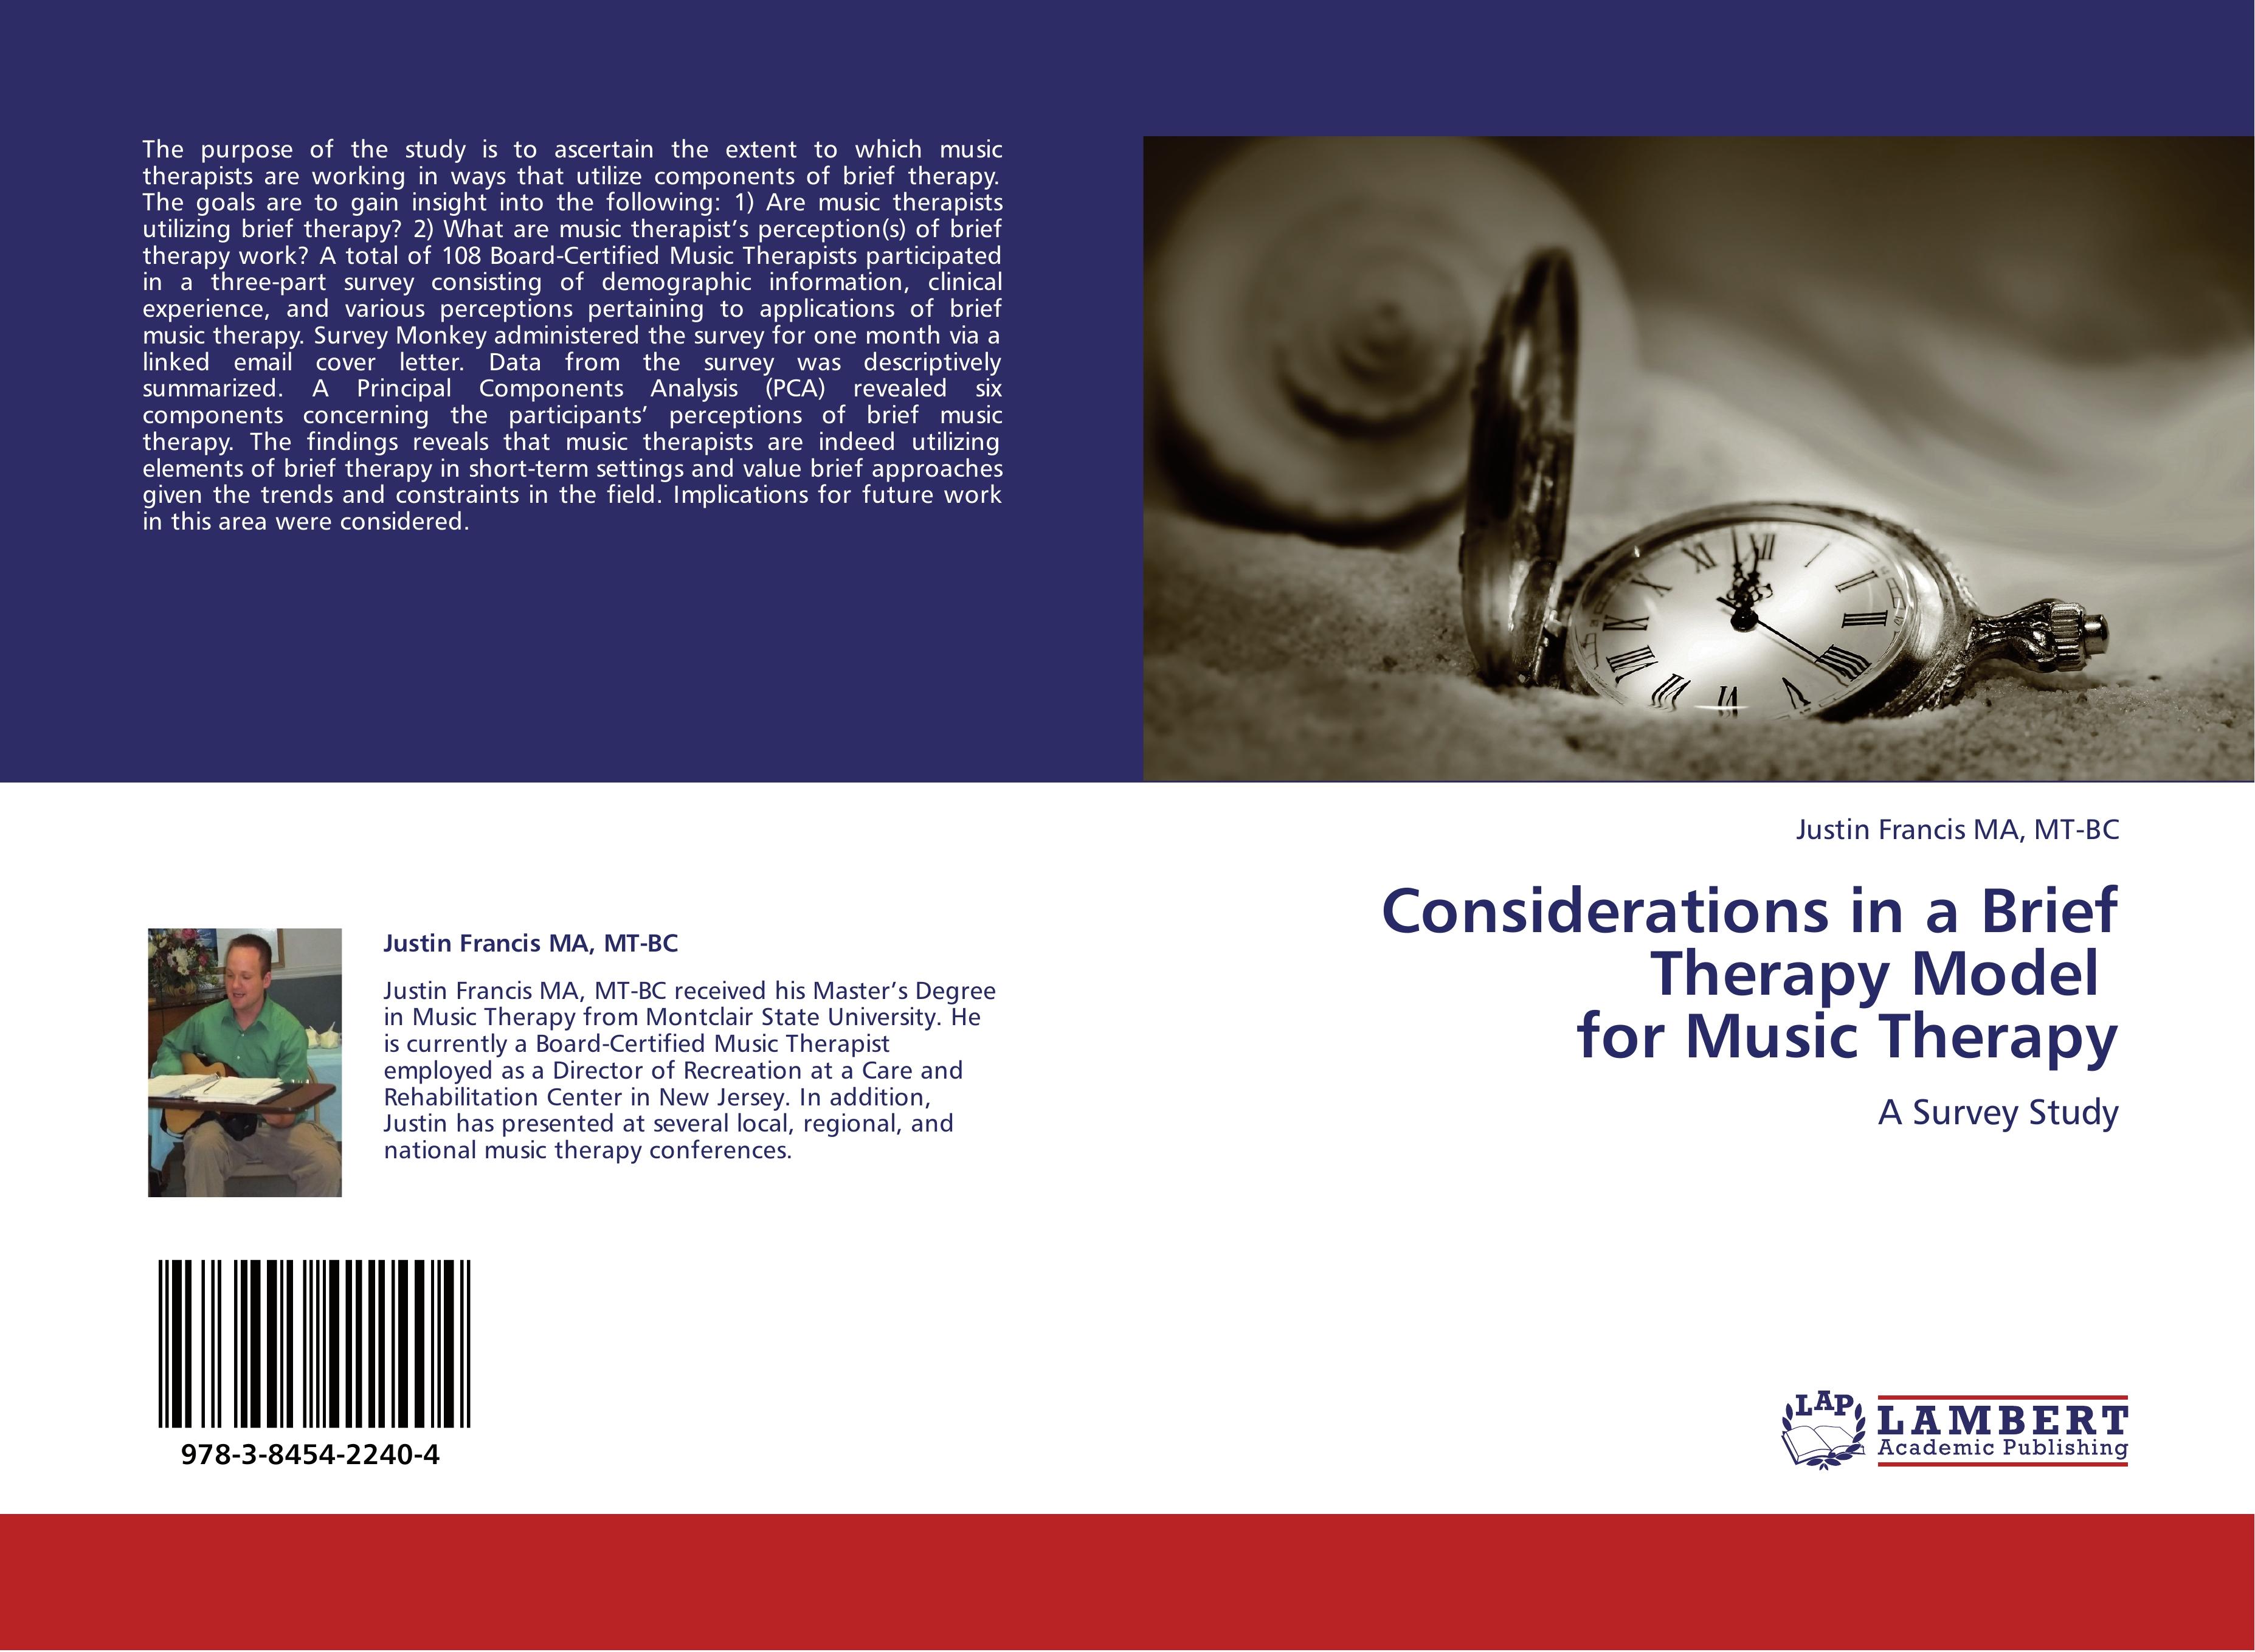 Considerations in a Brief Therapy Model for Music Therapy - Justin Francis MA, MT-BC